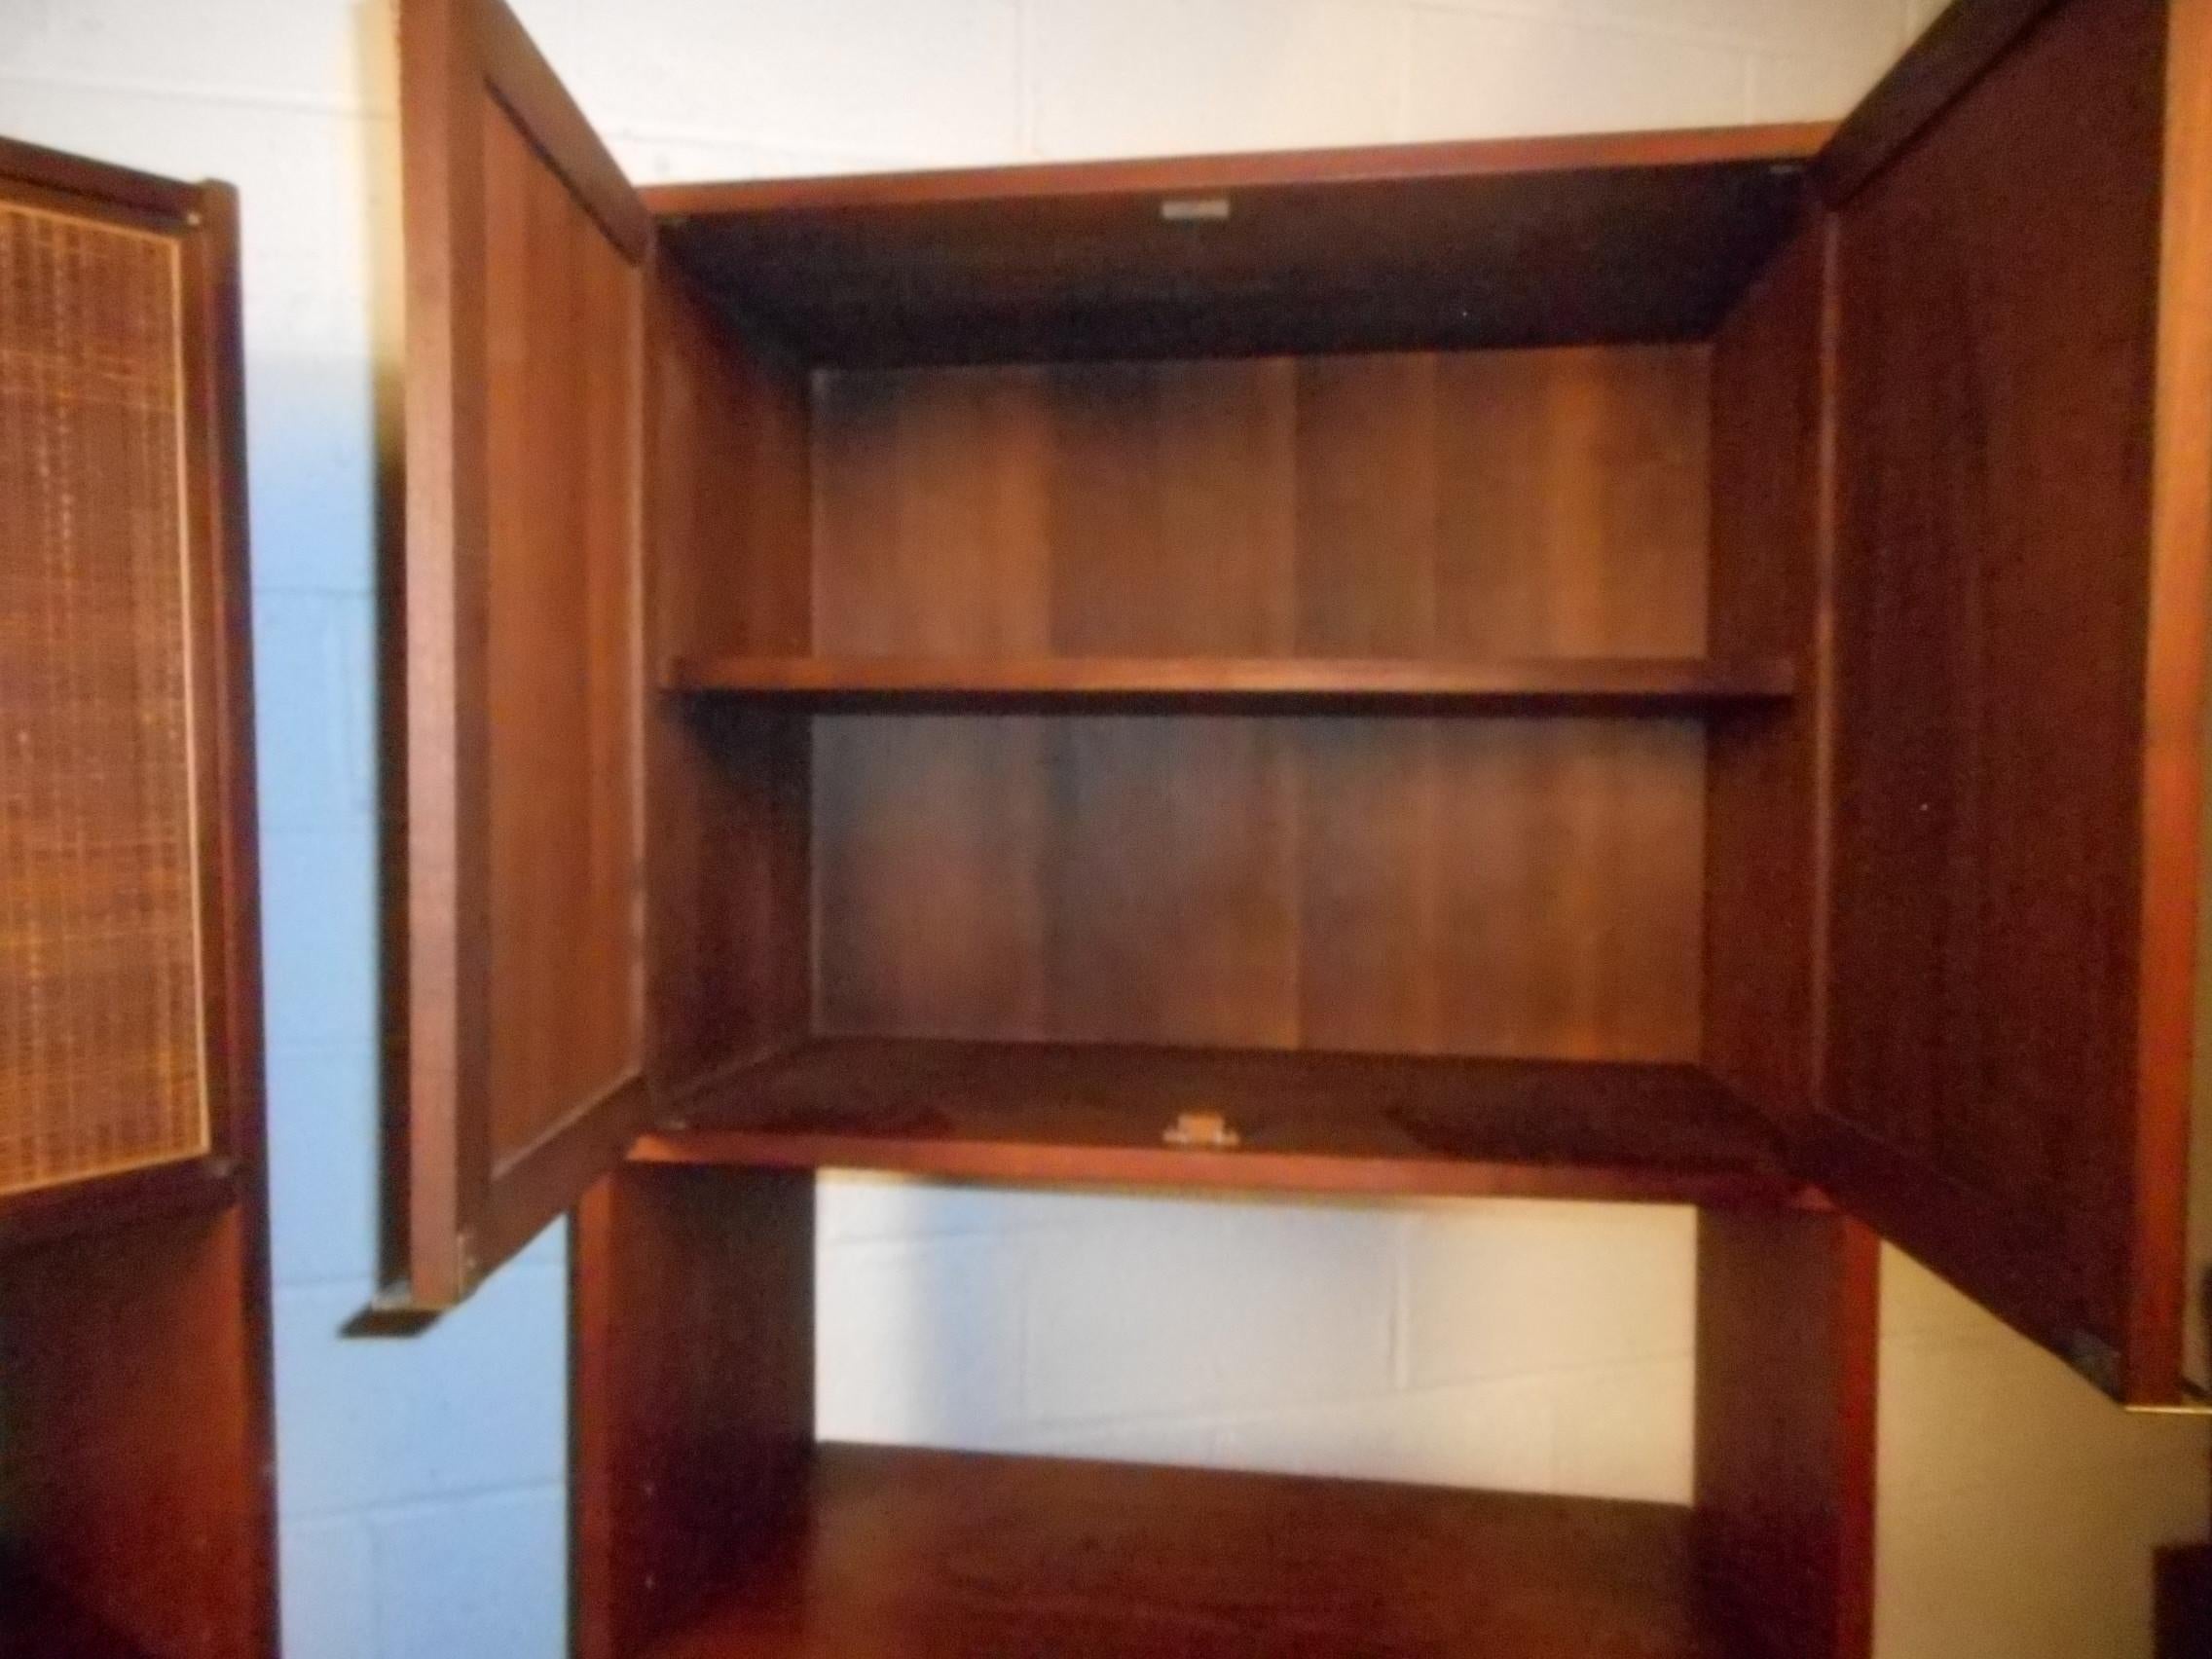 Pair of Mid-Century Modern Bookcases or Shelves 4